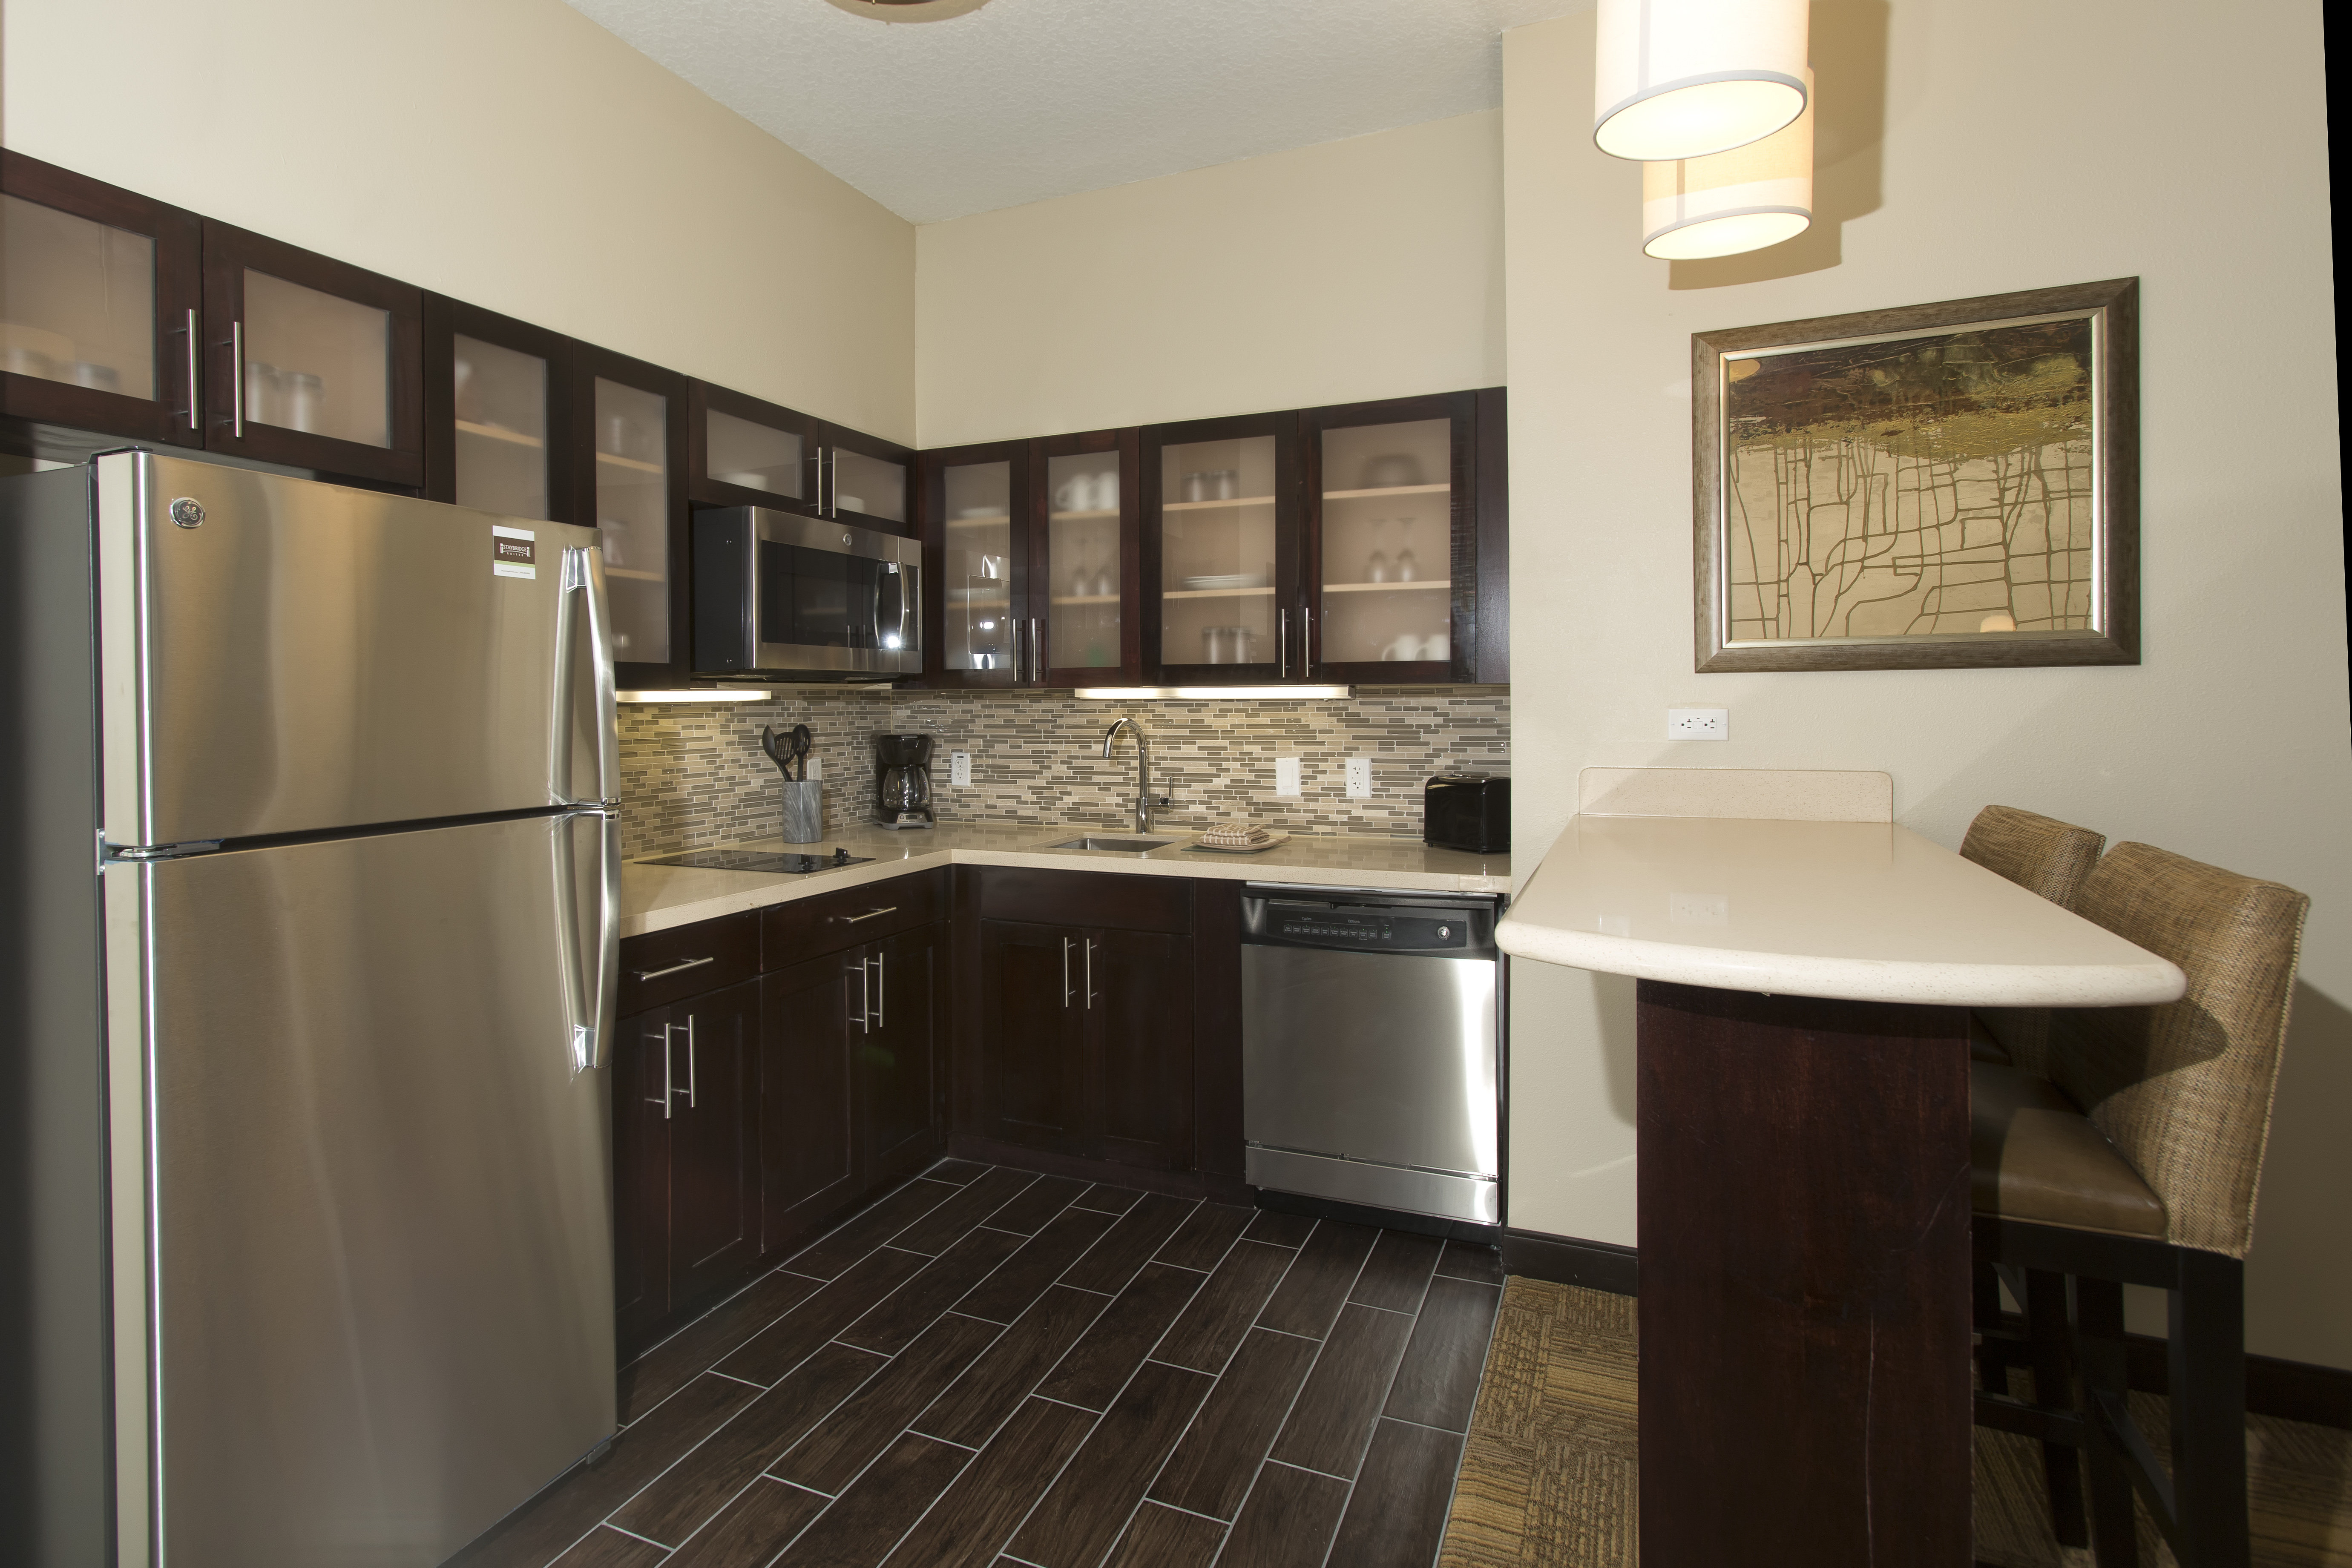 All our suites feature a full kitchen with everything you need.